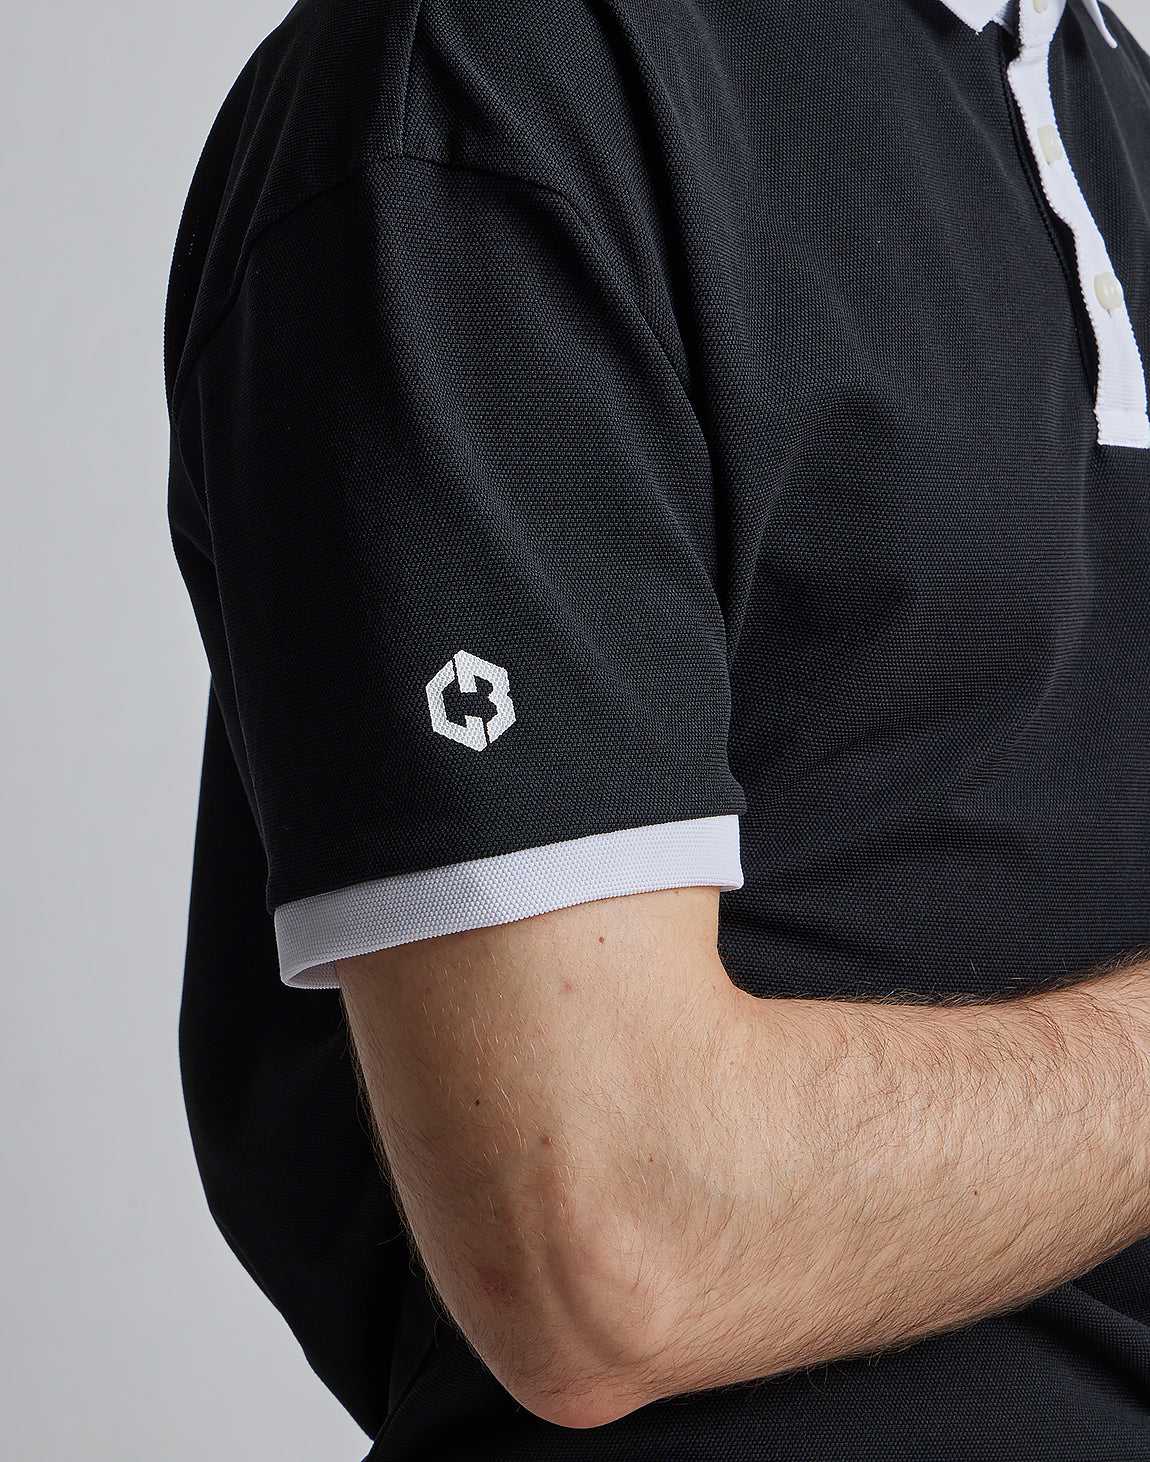 CRONOS BLACK LINE POLO – クロノス CRONOS Official Store